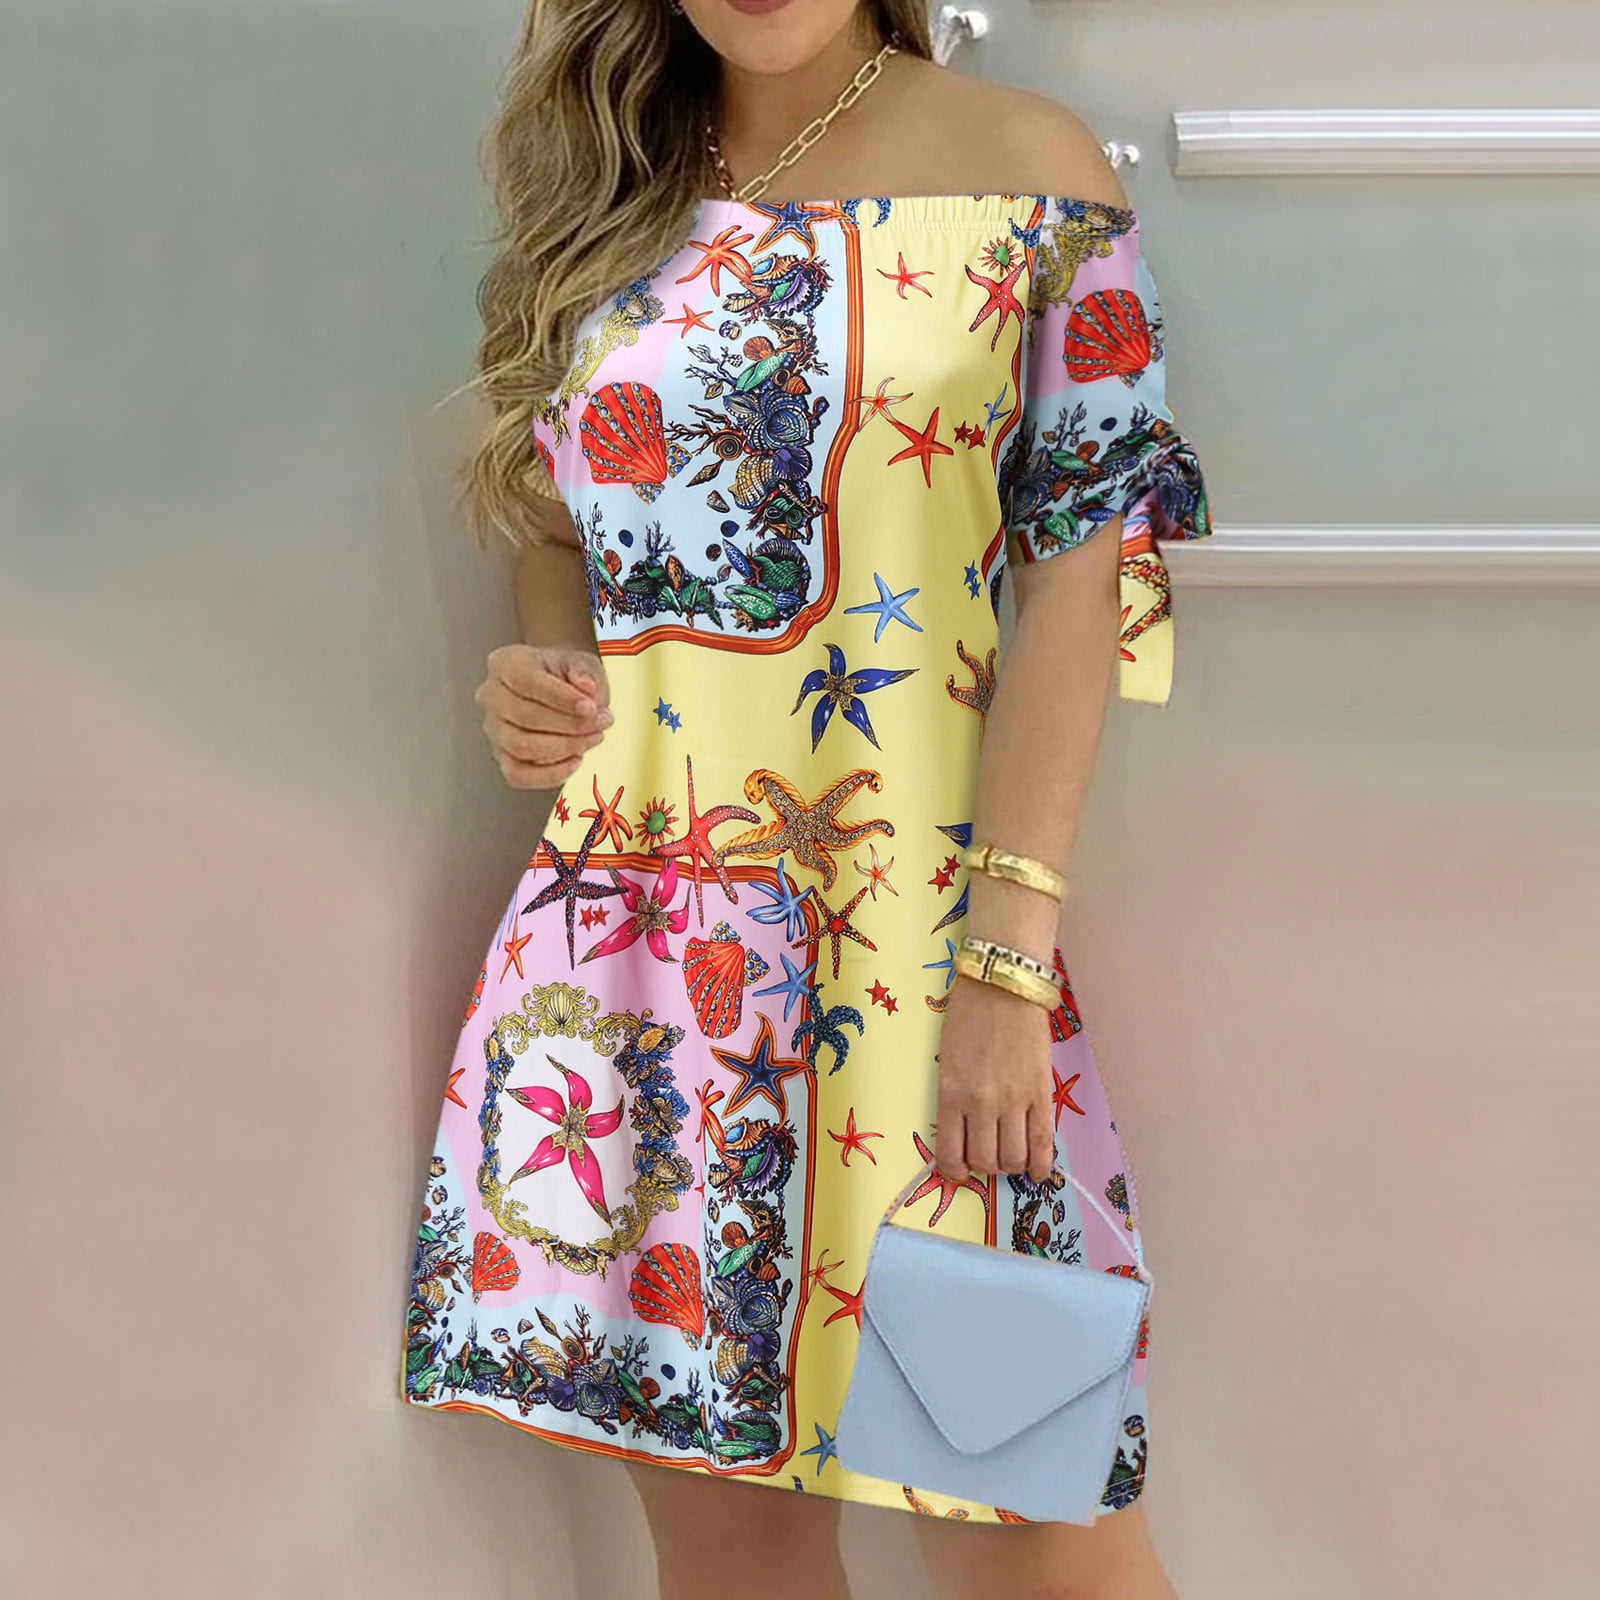 TOTO〗Mini Dresses For Women Fashion Casual Summer Off Shoulder Floral Print  Dress Stripped Lace Up Short Sleeves Mini Dress 